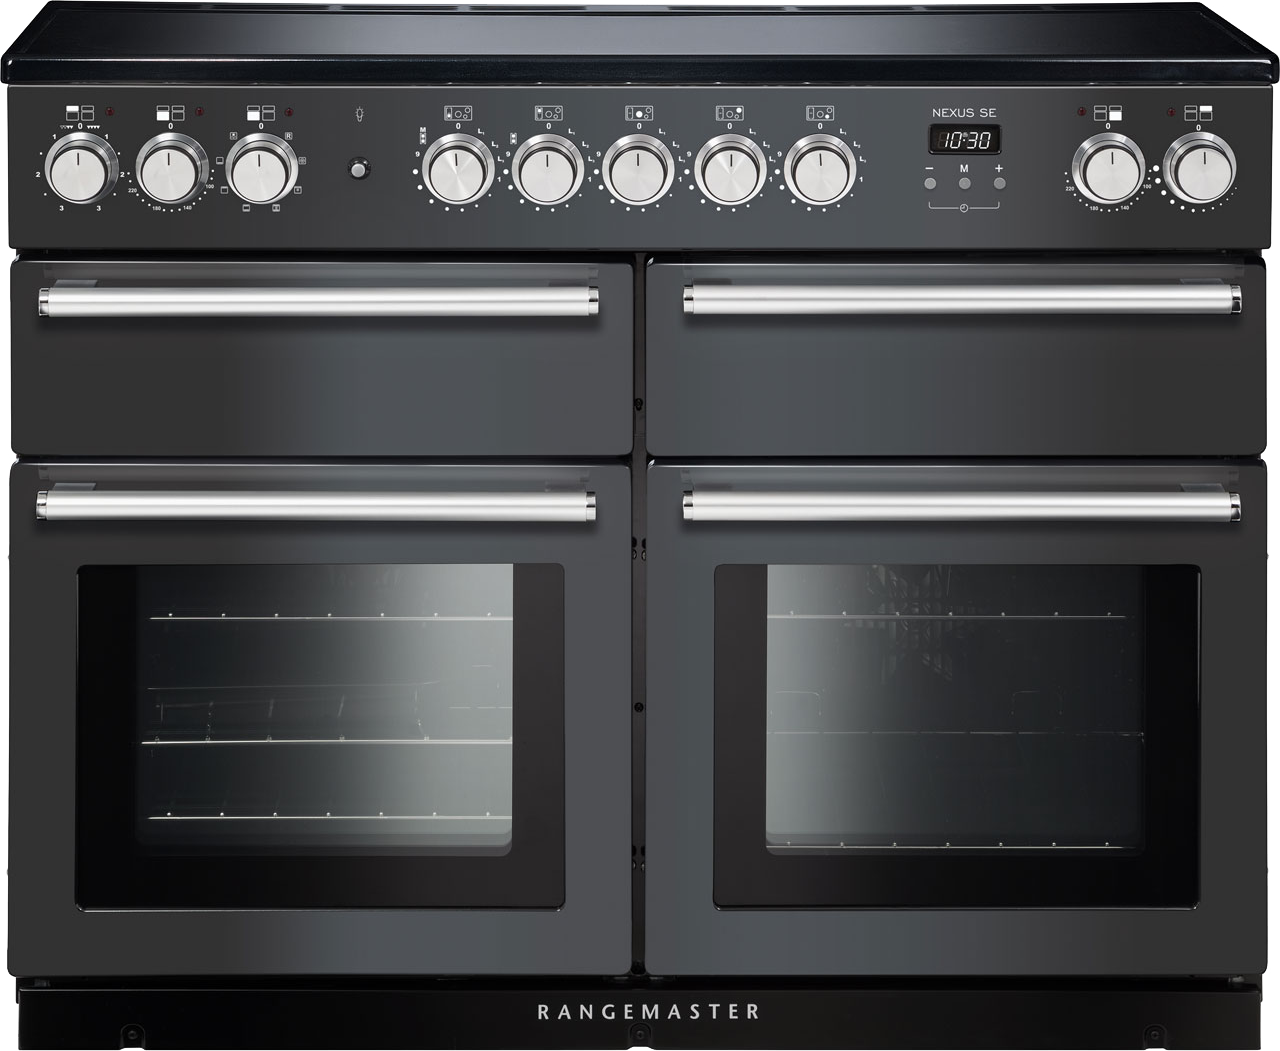 Rangemaster Nexus SE NEXSE110EISL/C 110cm Electric Range Cooker with Induction Hob - Slate - A/A Rated, Graphite